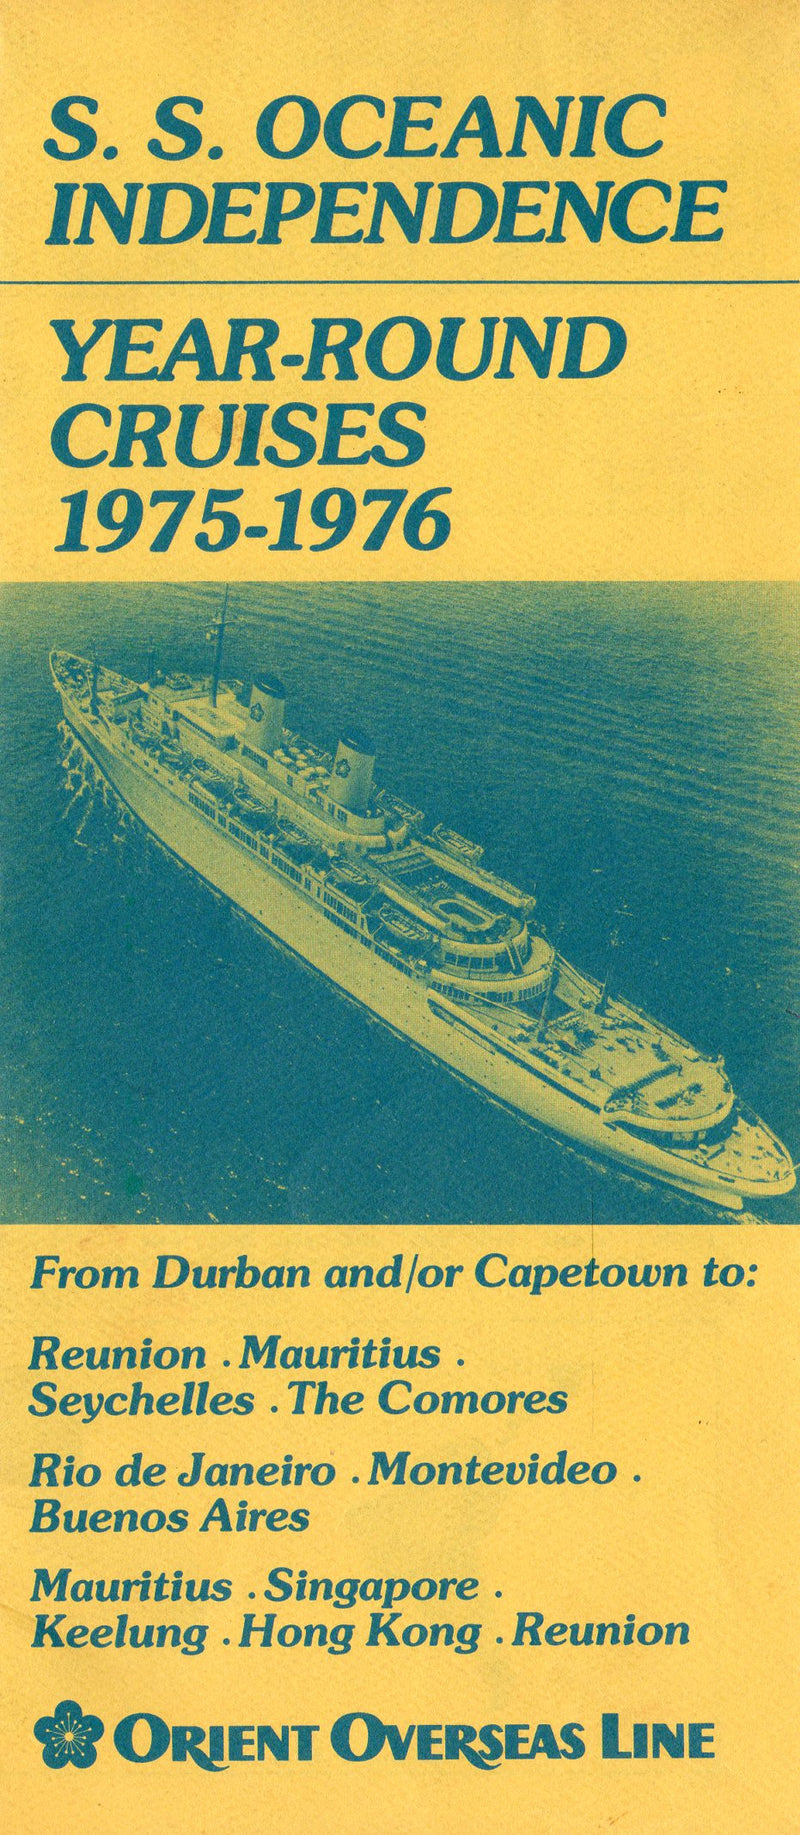 OCEANIC INDEPENDENCE: 1951 - Rarely-heard-of South Africa cruises 1975-76